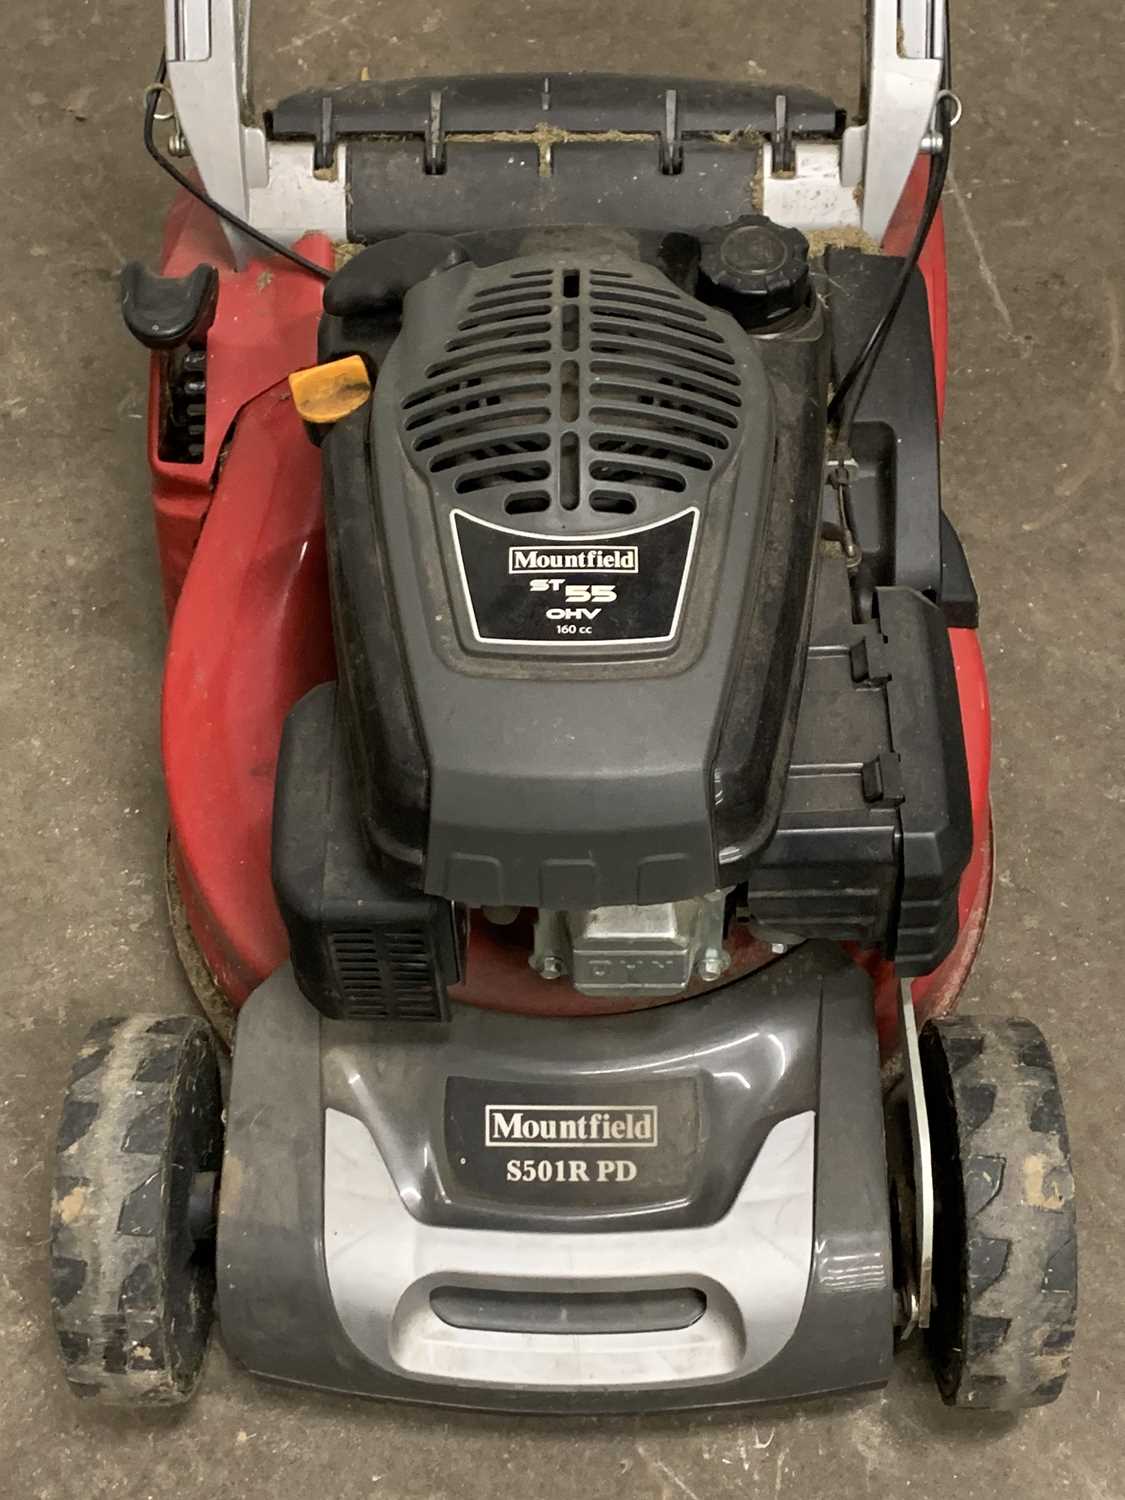 PETROL LAWN MOWER: MOUNTFIELD S501R PD Provenance: deceased estate Conwy - Image 2 of 3